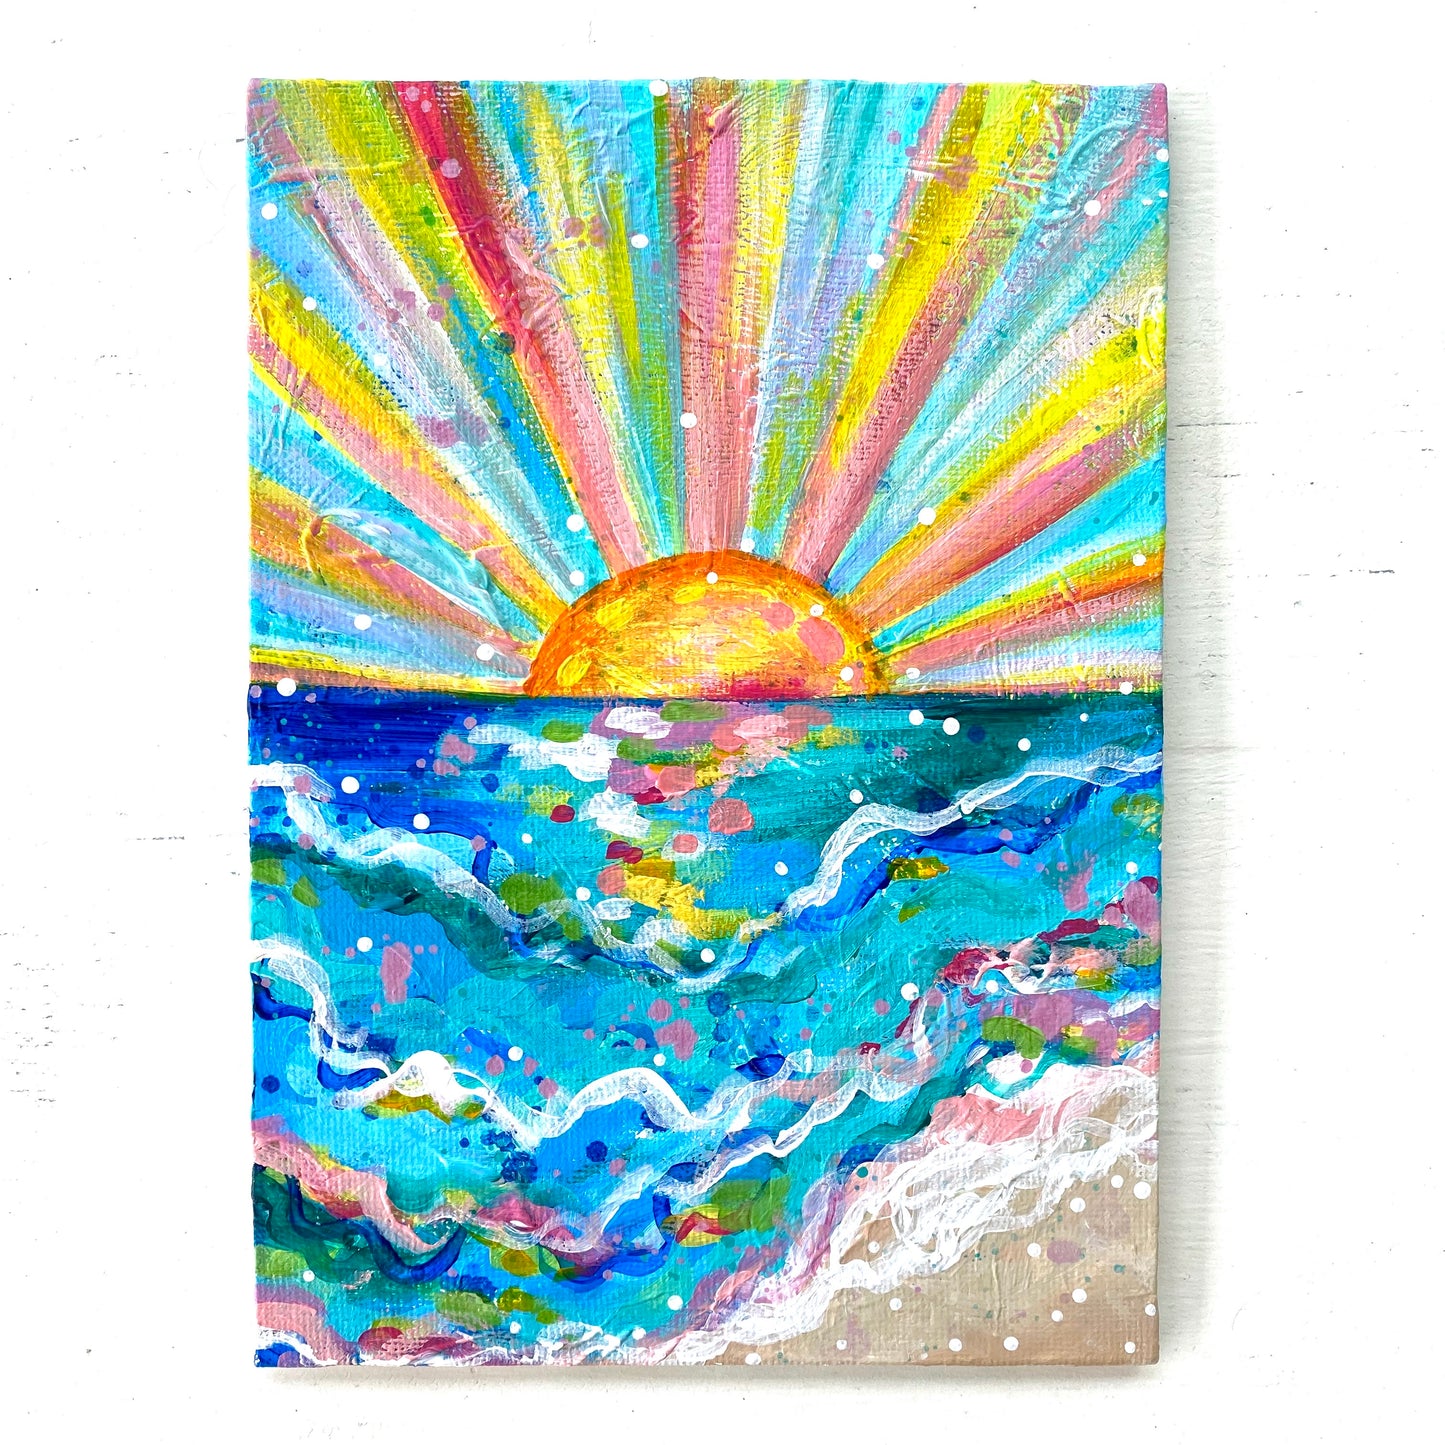 August 2020 Daily Painting Day 3 “Sun Rays for Days” 5x7 inch original